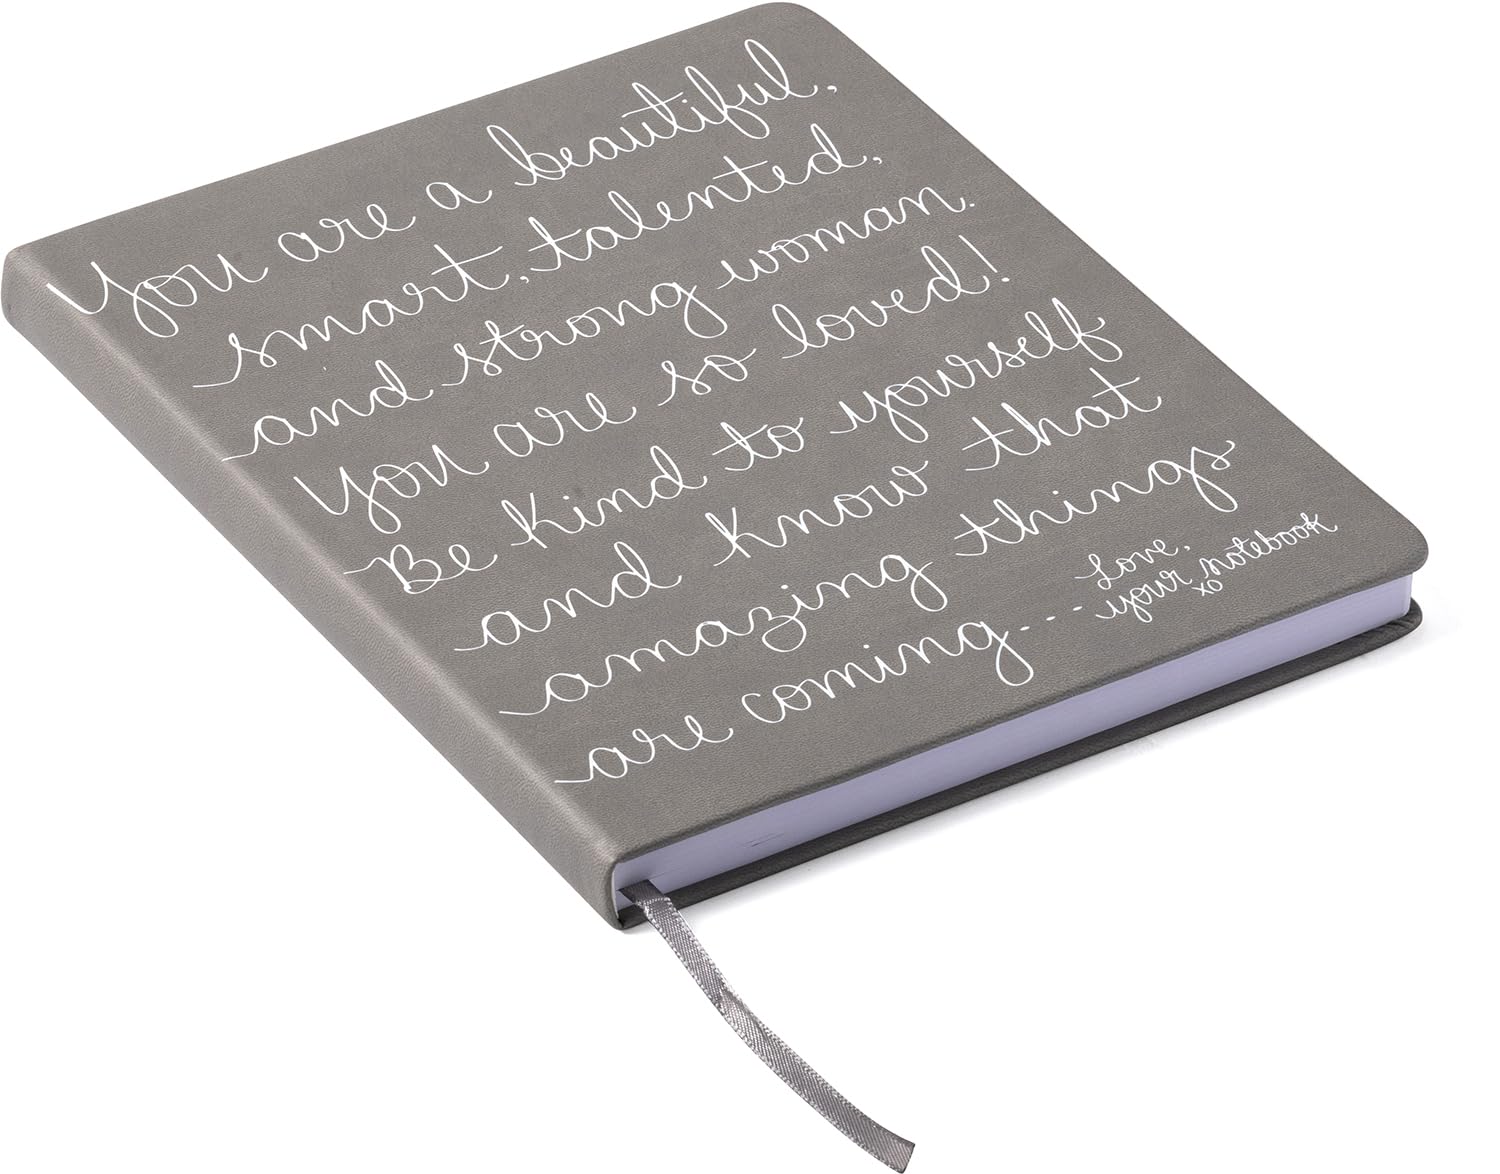 Eccolo Dayna Lee 'Love, Your Notebook' Journal